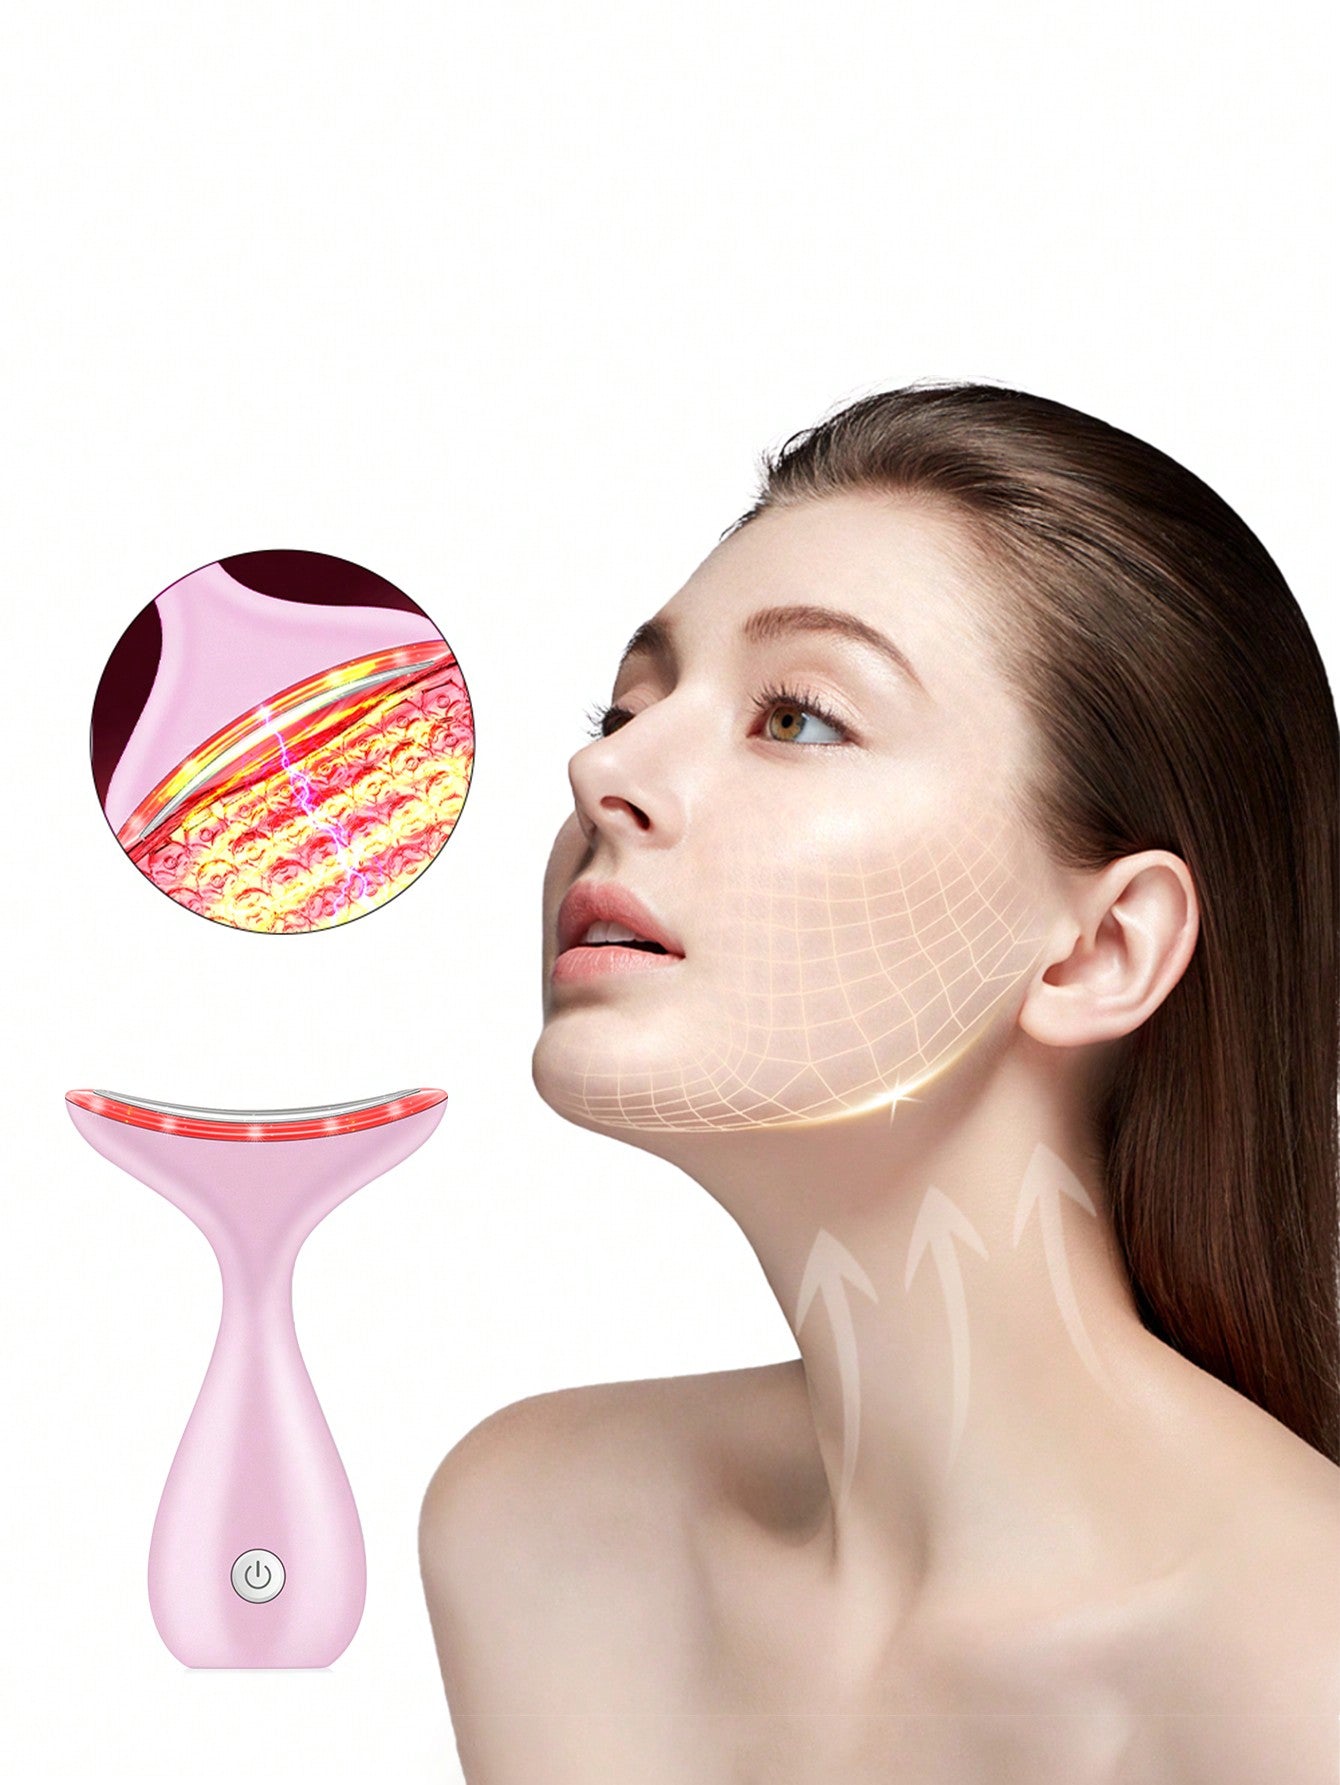 1 Firm And Tender Skin, Smooth Wrinkles, Double Chin Lifting Tool, Skincare Facial Massager, Neck Beauty Device-Pink-1